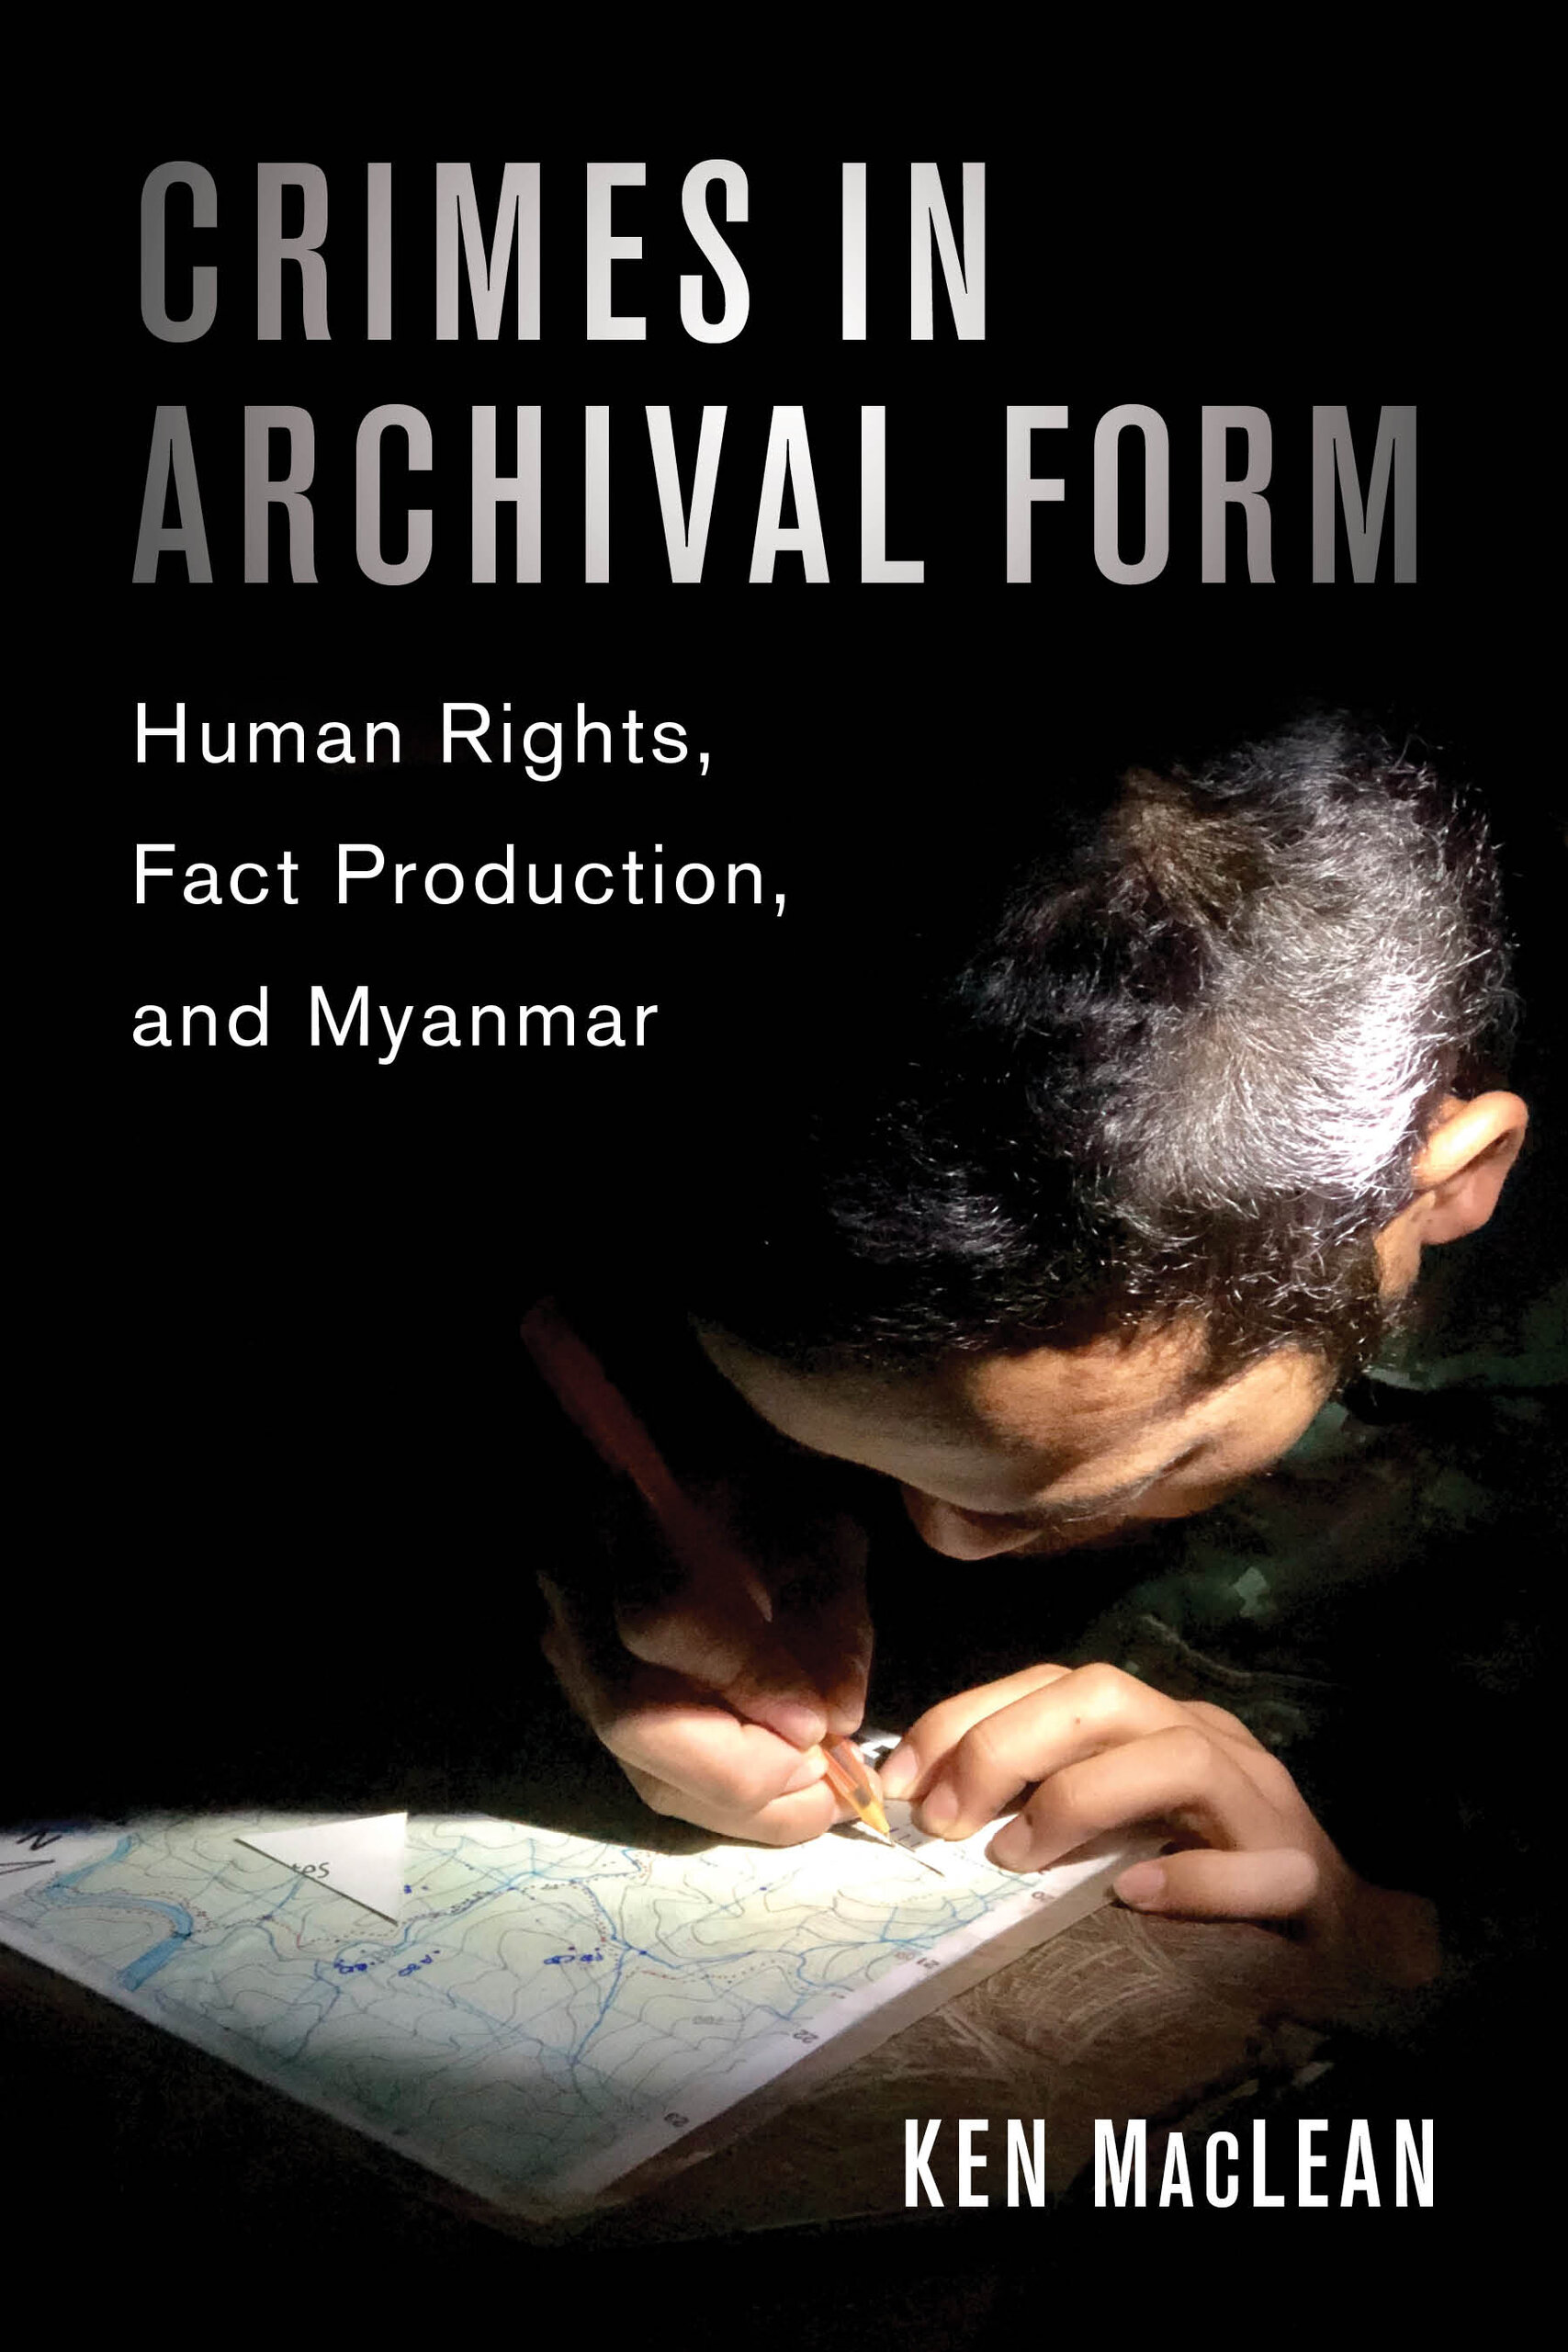 Crimes in archival form: human rights, fact production, and Myanmar